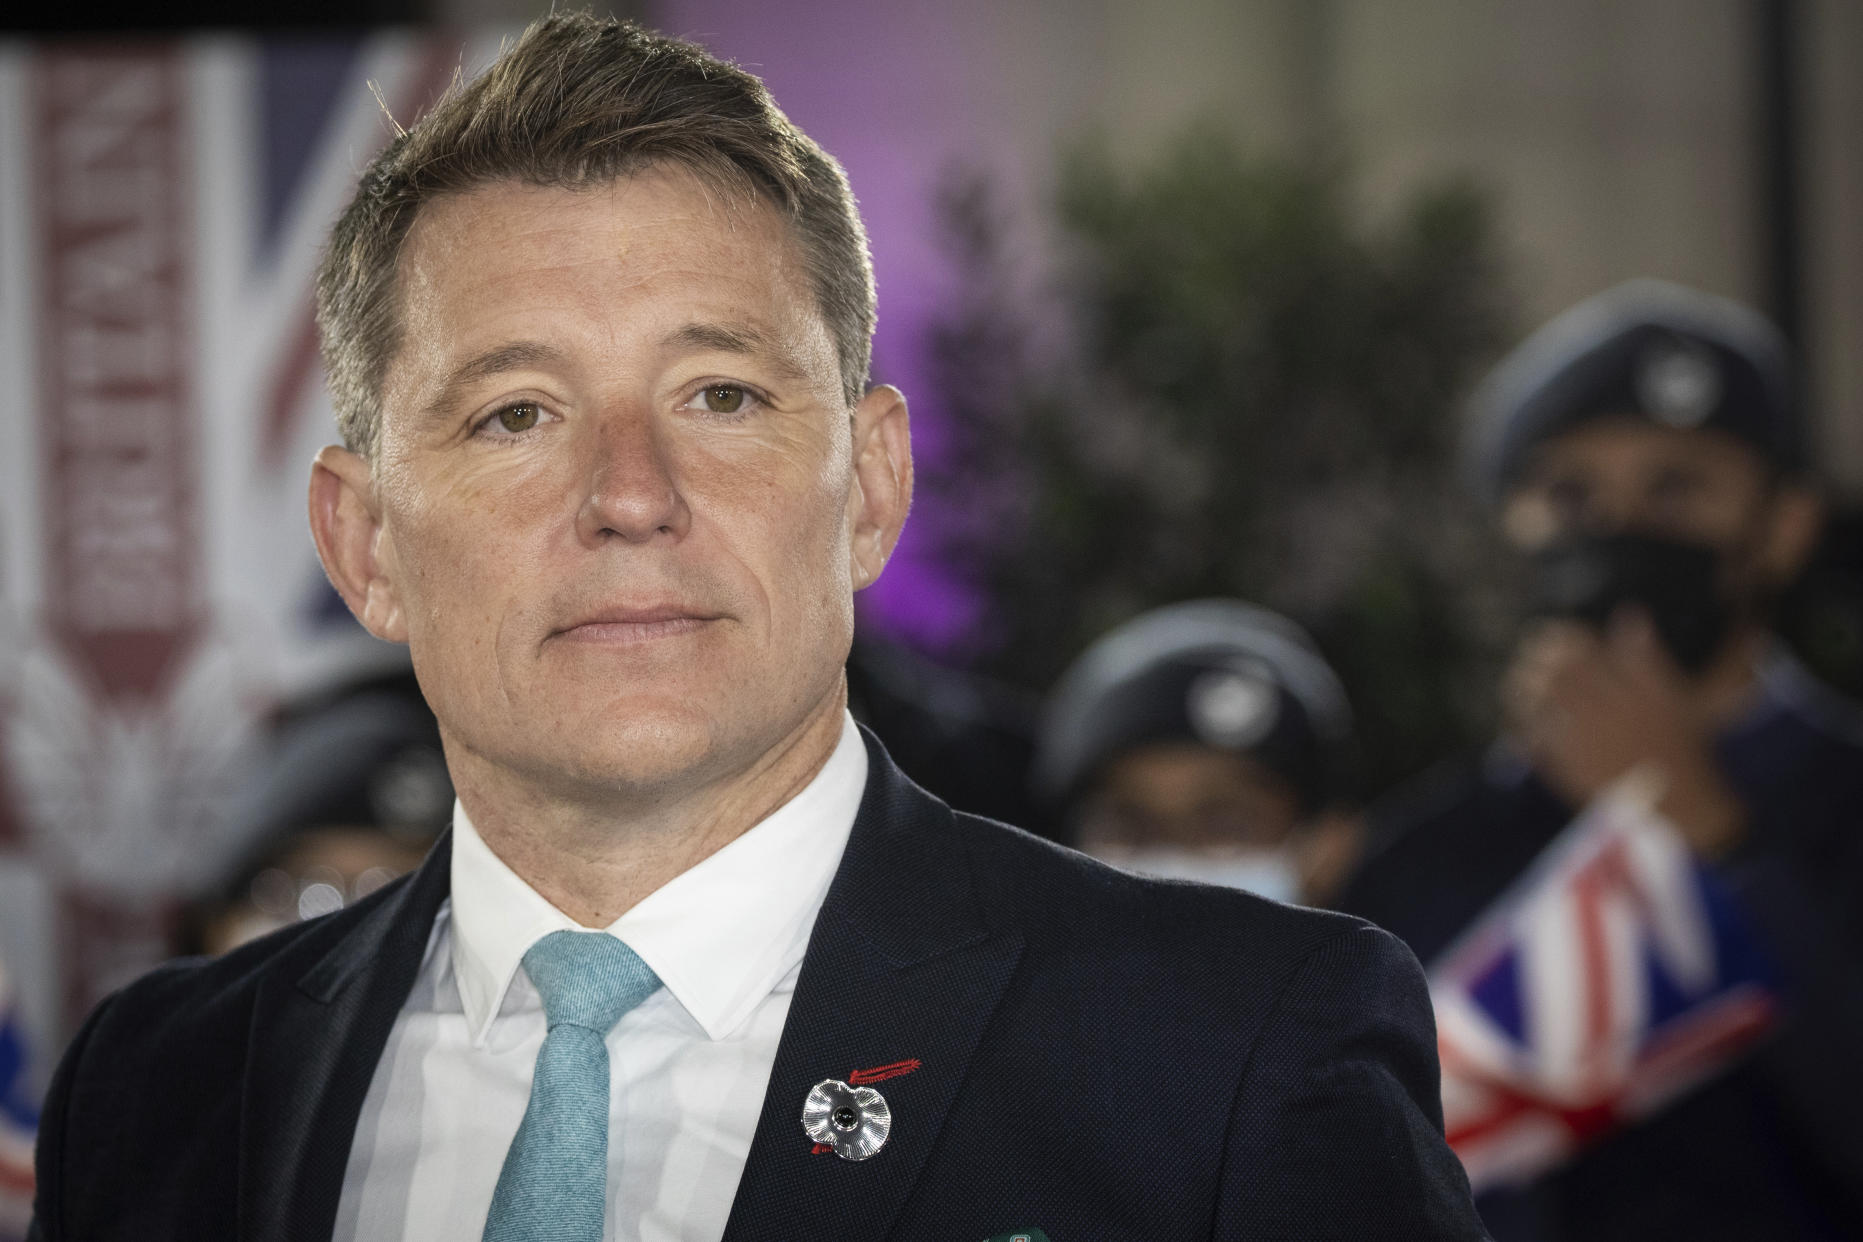 Ben Shephard poses for photographer upon arrival at the Pride of Britain Awards on Saturday, Oct. 30, 2021 in London. (Photo by Vianney Le Caer/Invision/AP)